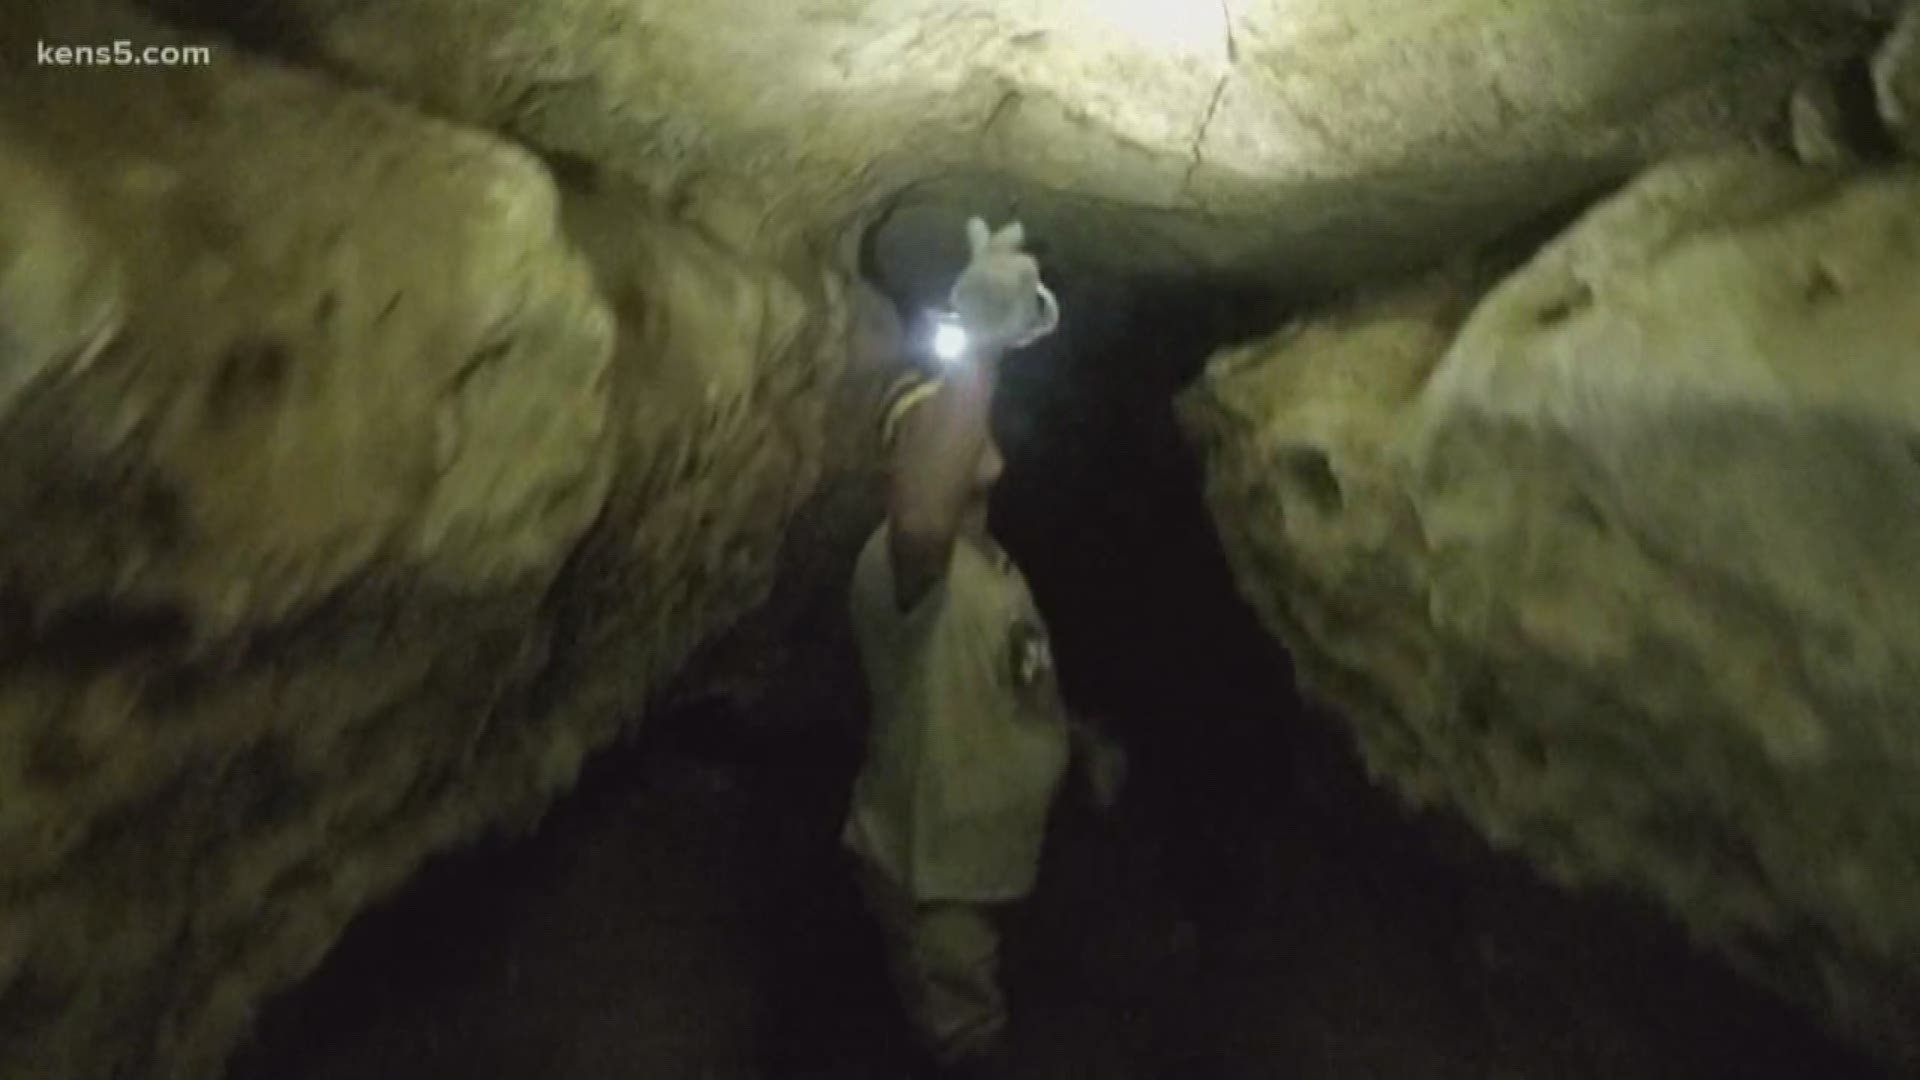 There are more than 500 documented caves in Bexar County. In this week's Texas Outdoors, we're checking out Robber Baron Cave.